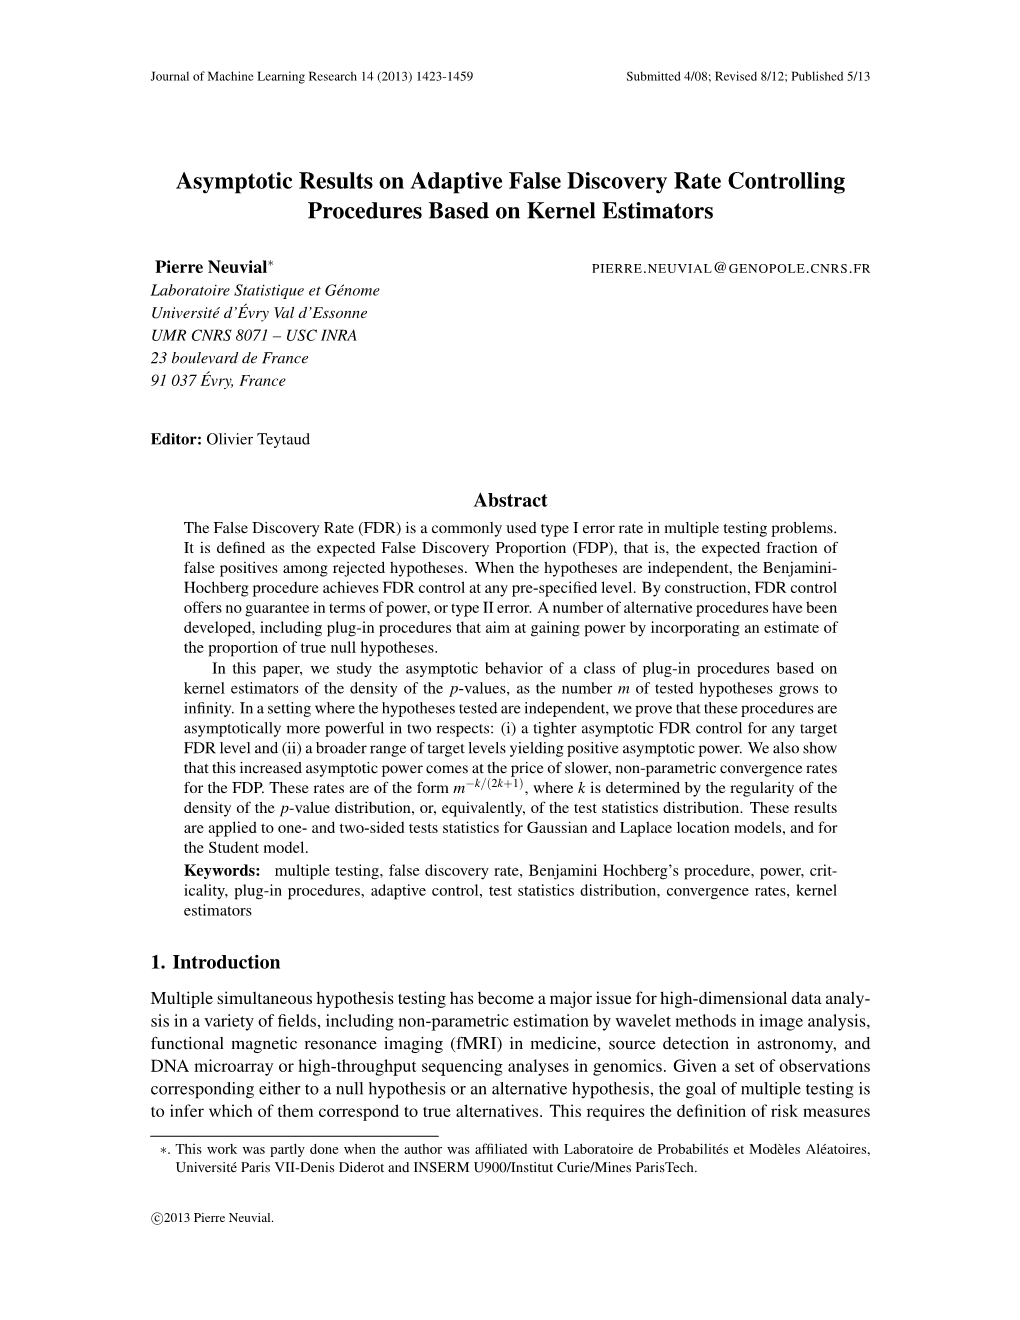 Asymptotic Results on Adaptive False Discovery Rate Controlling Procedures Based on Kernel Estimators